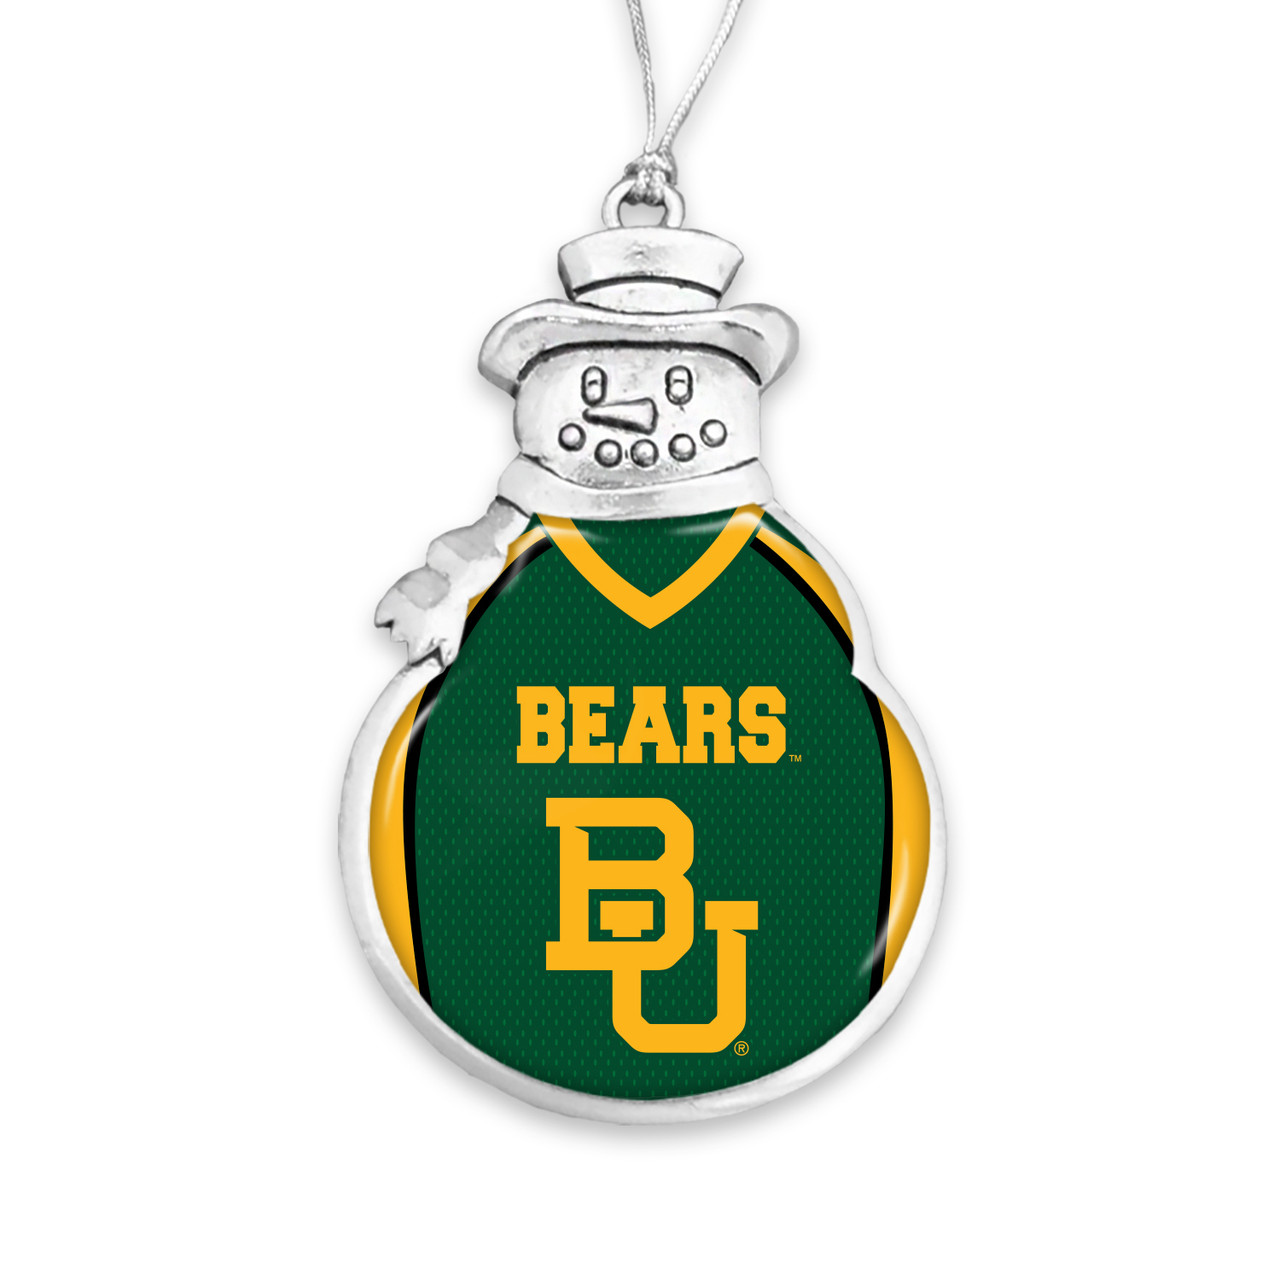 Baylor Bears Snowman Ornament with Football Jersey